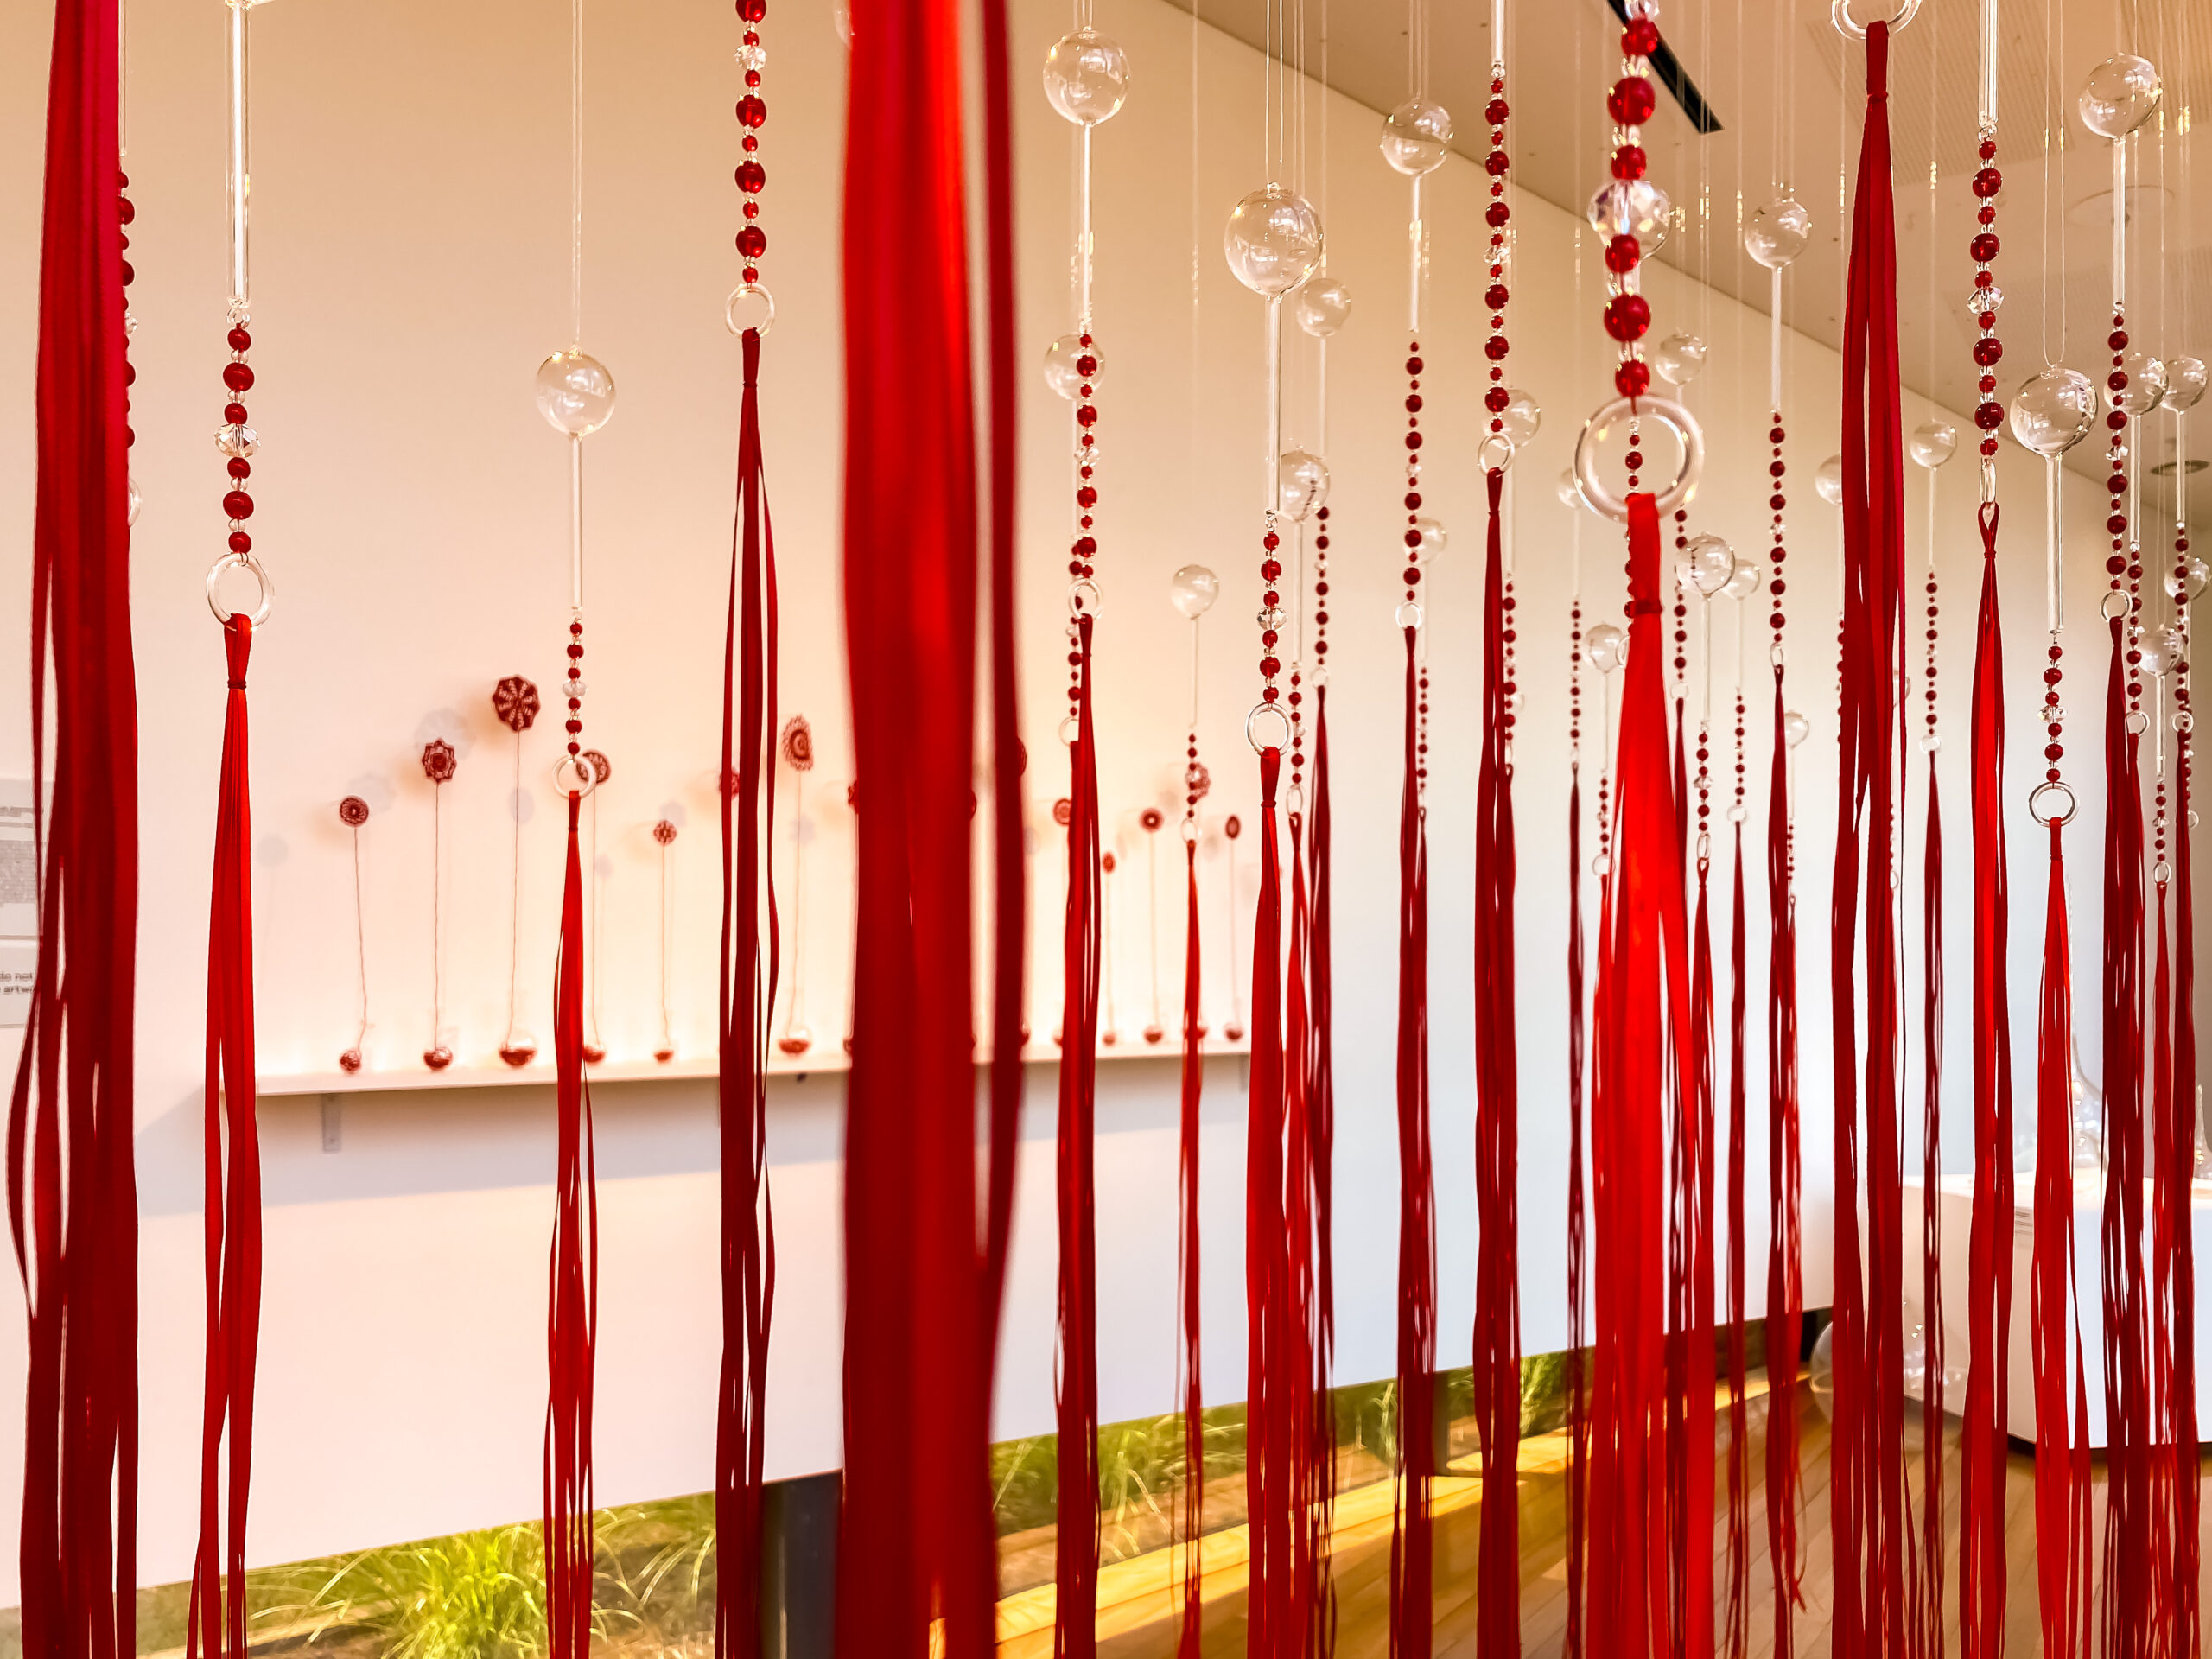 Long red stands of red ribbons topped with red and clear beads and upended clear round-bottomed flasks. These are hanging suspended kind of like a forest of satin